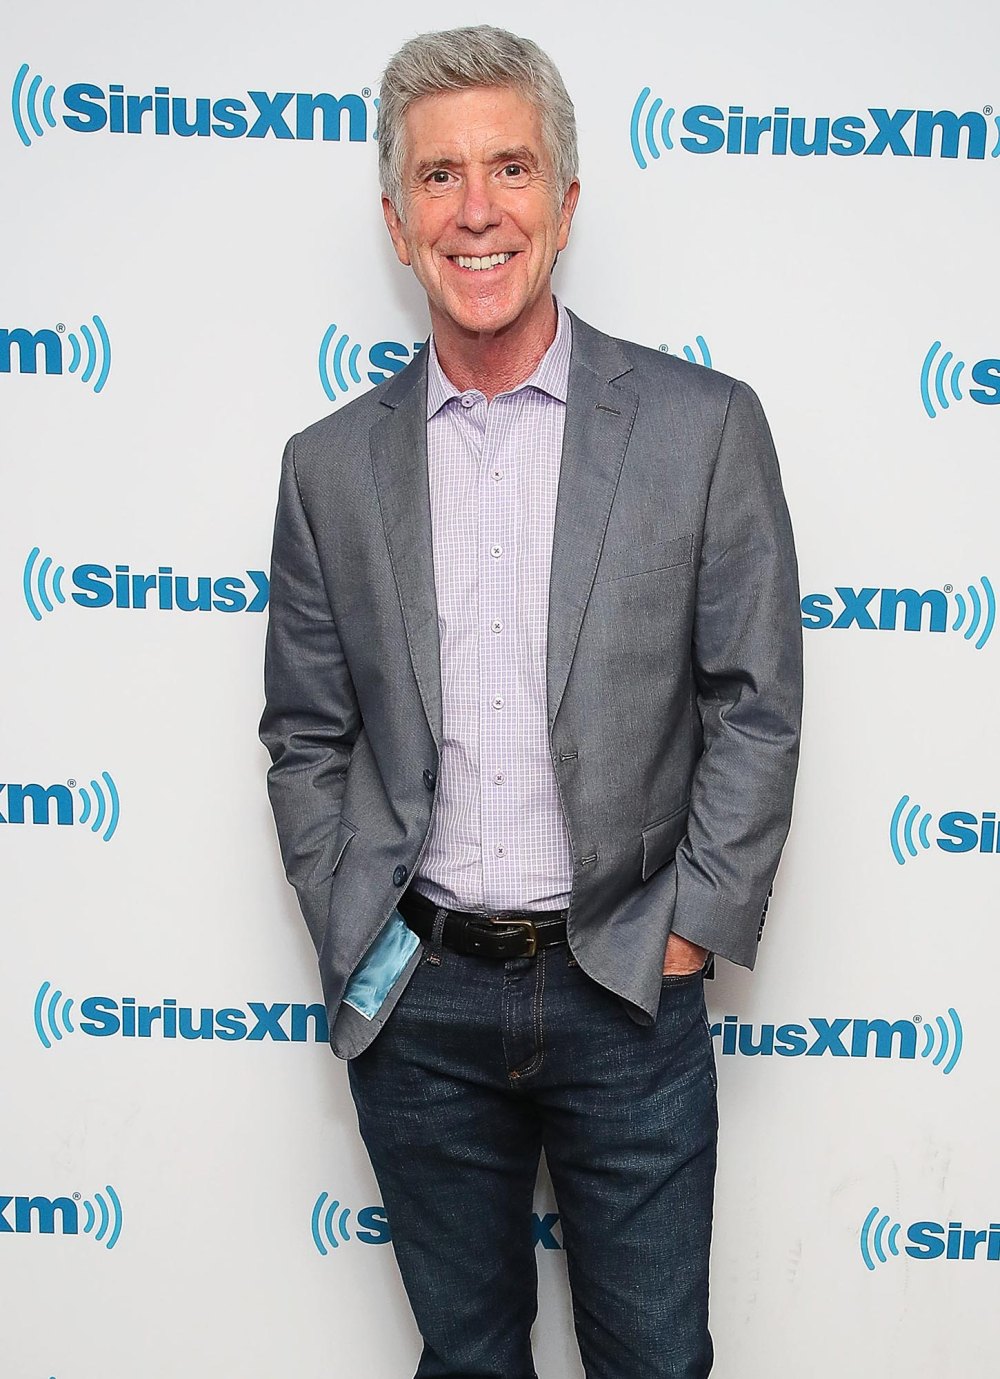 Former DWTS Host Tom Bergeron Says Infamous Simone Biles Moment Was One of the Biggest Mistakes He Made Live 349